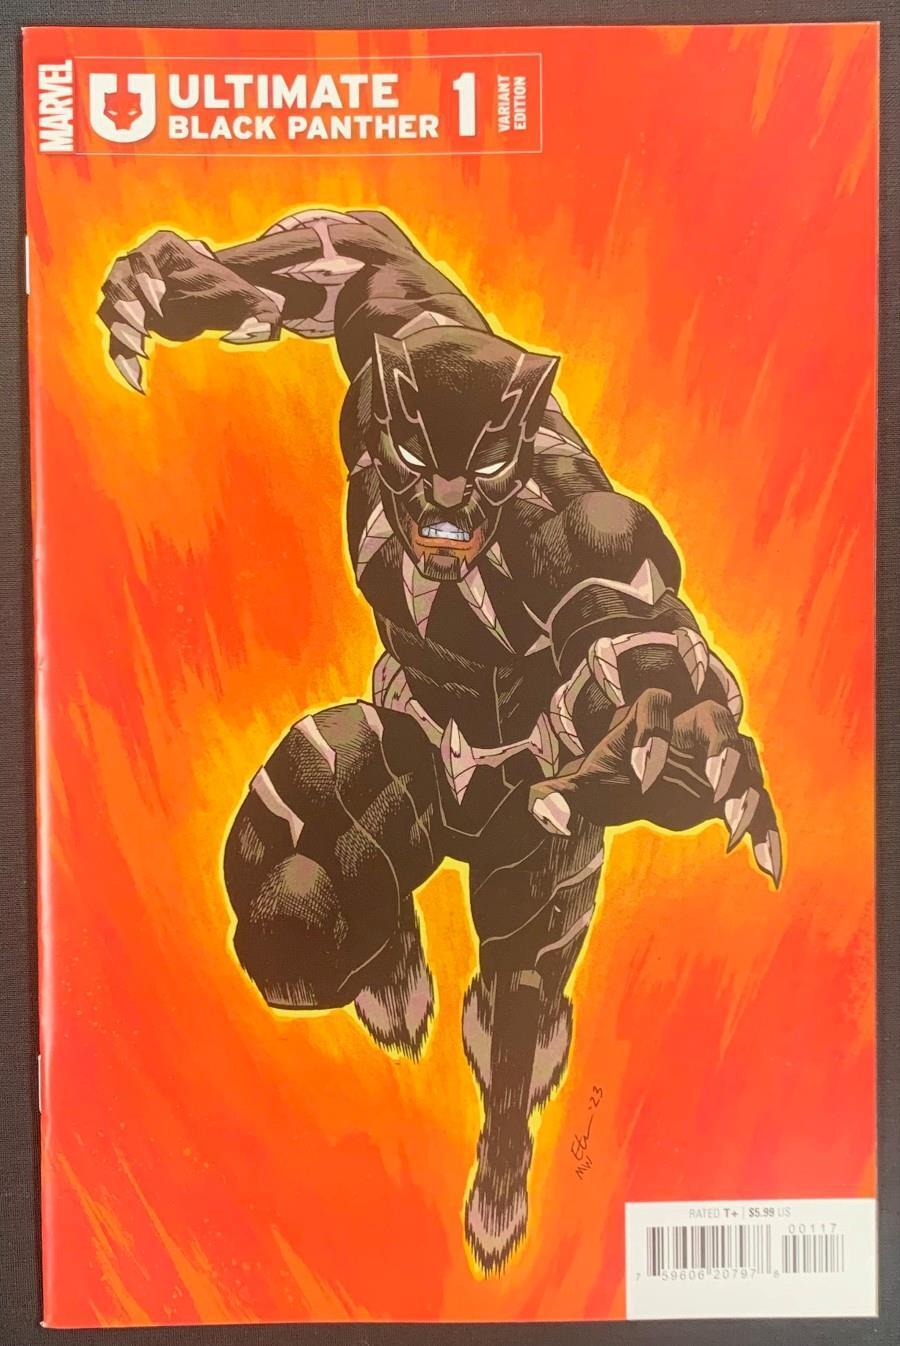 ULTIMATE BLACK PANTHER #1 1:25 VARIANT ETHAN YOUNG RETAIL INCENTIVE 1st PRINT